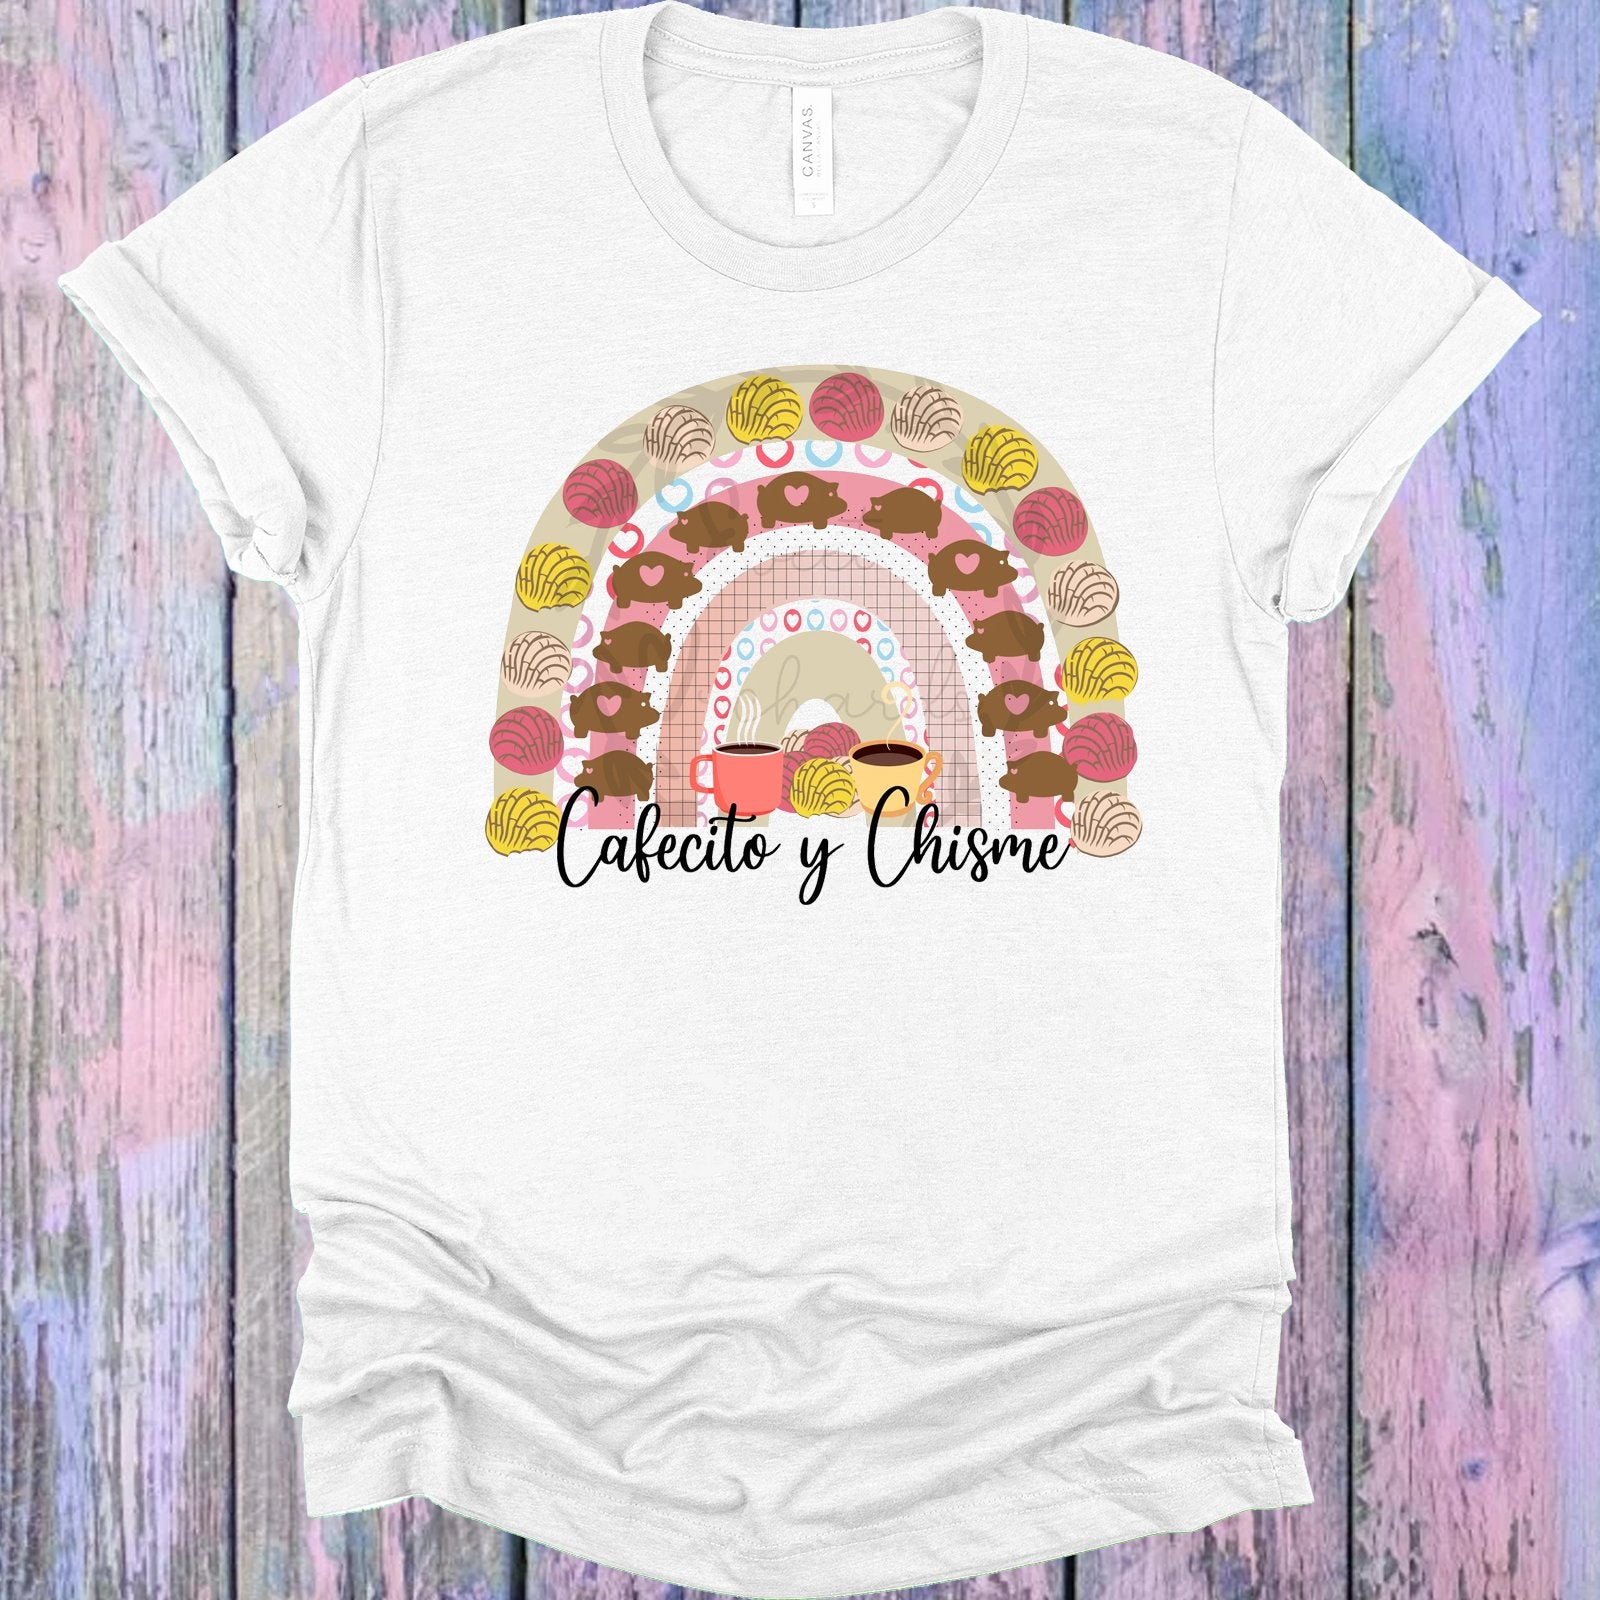 Cafecito Y Chisme Graphic Tee Graphic Tee